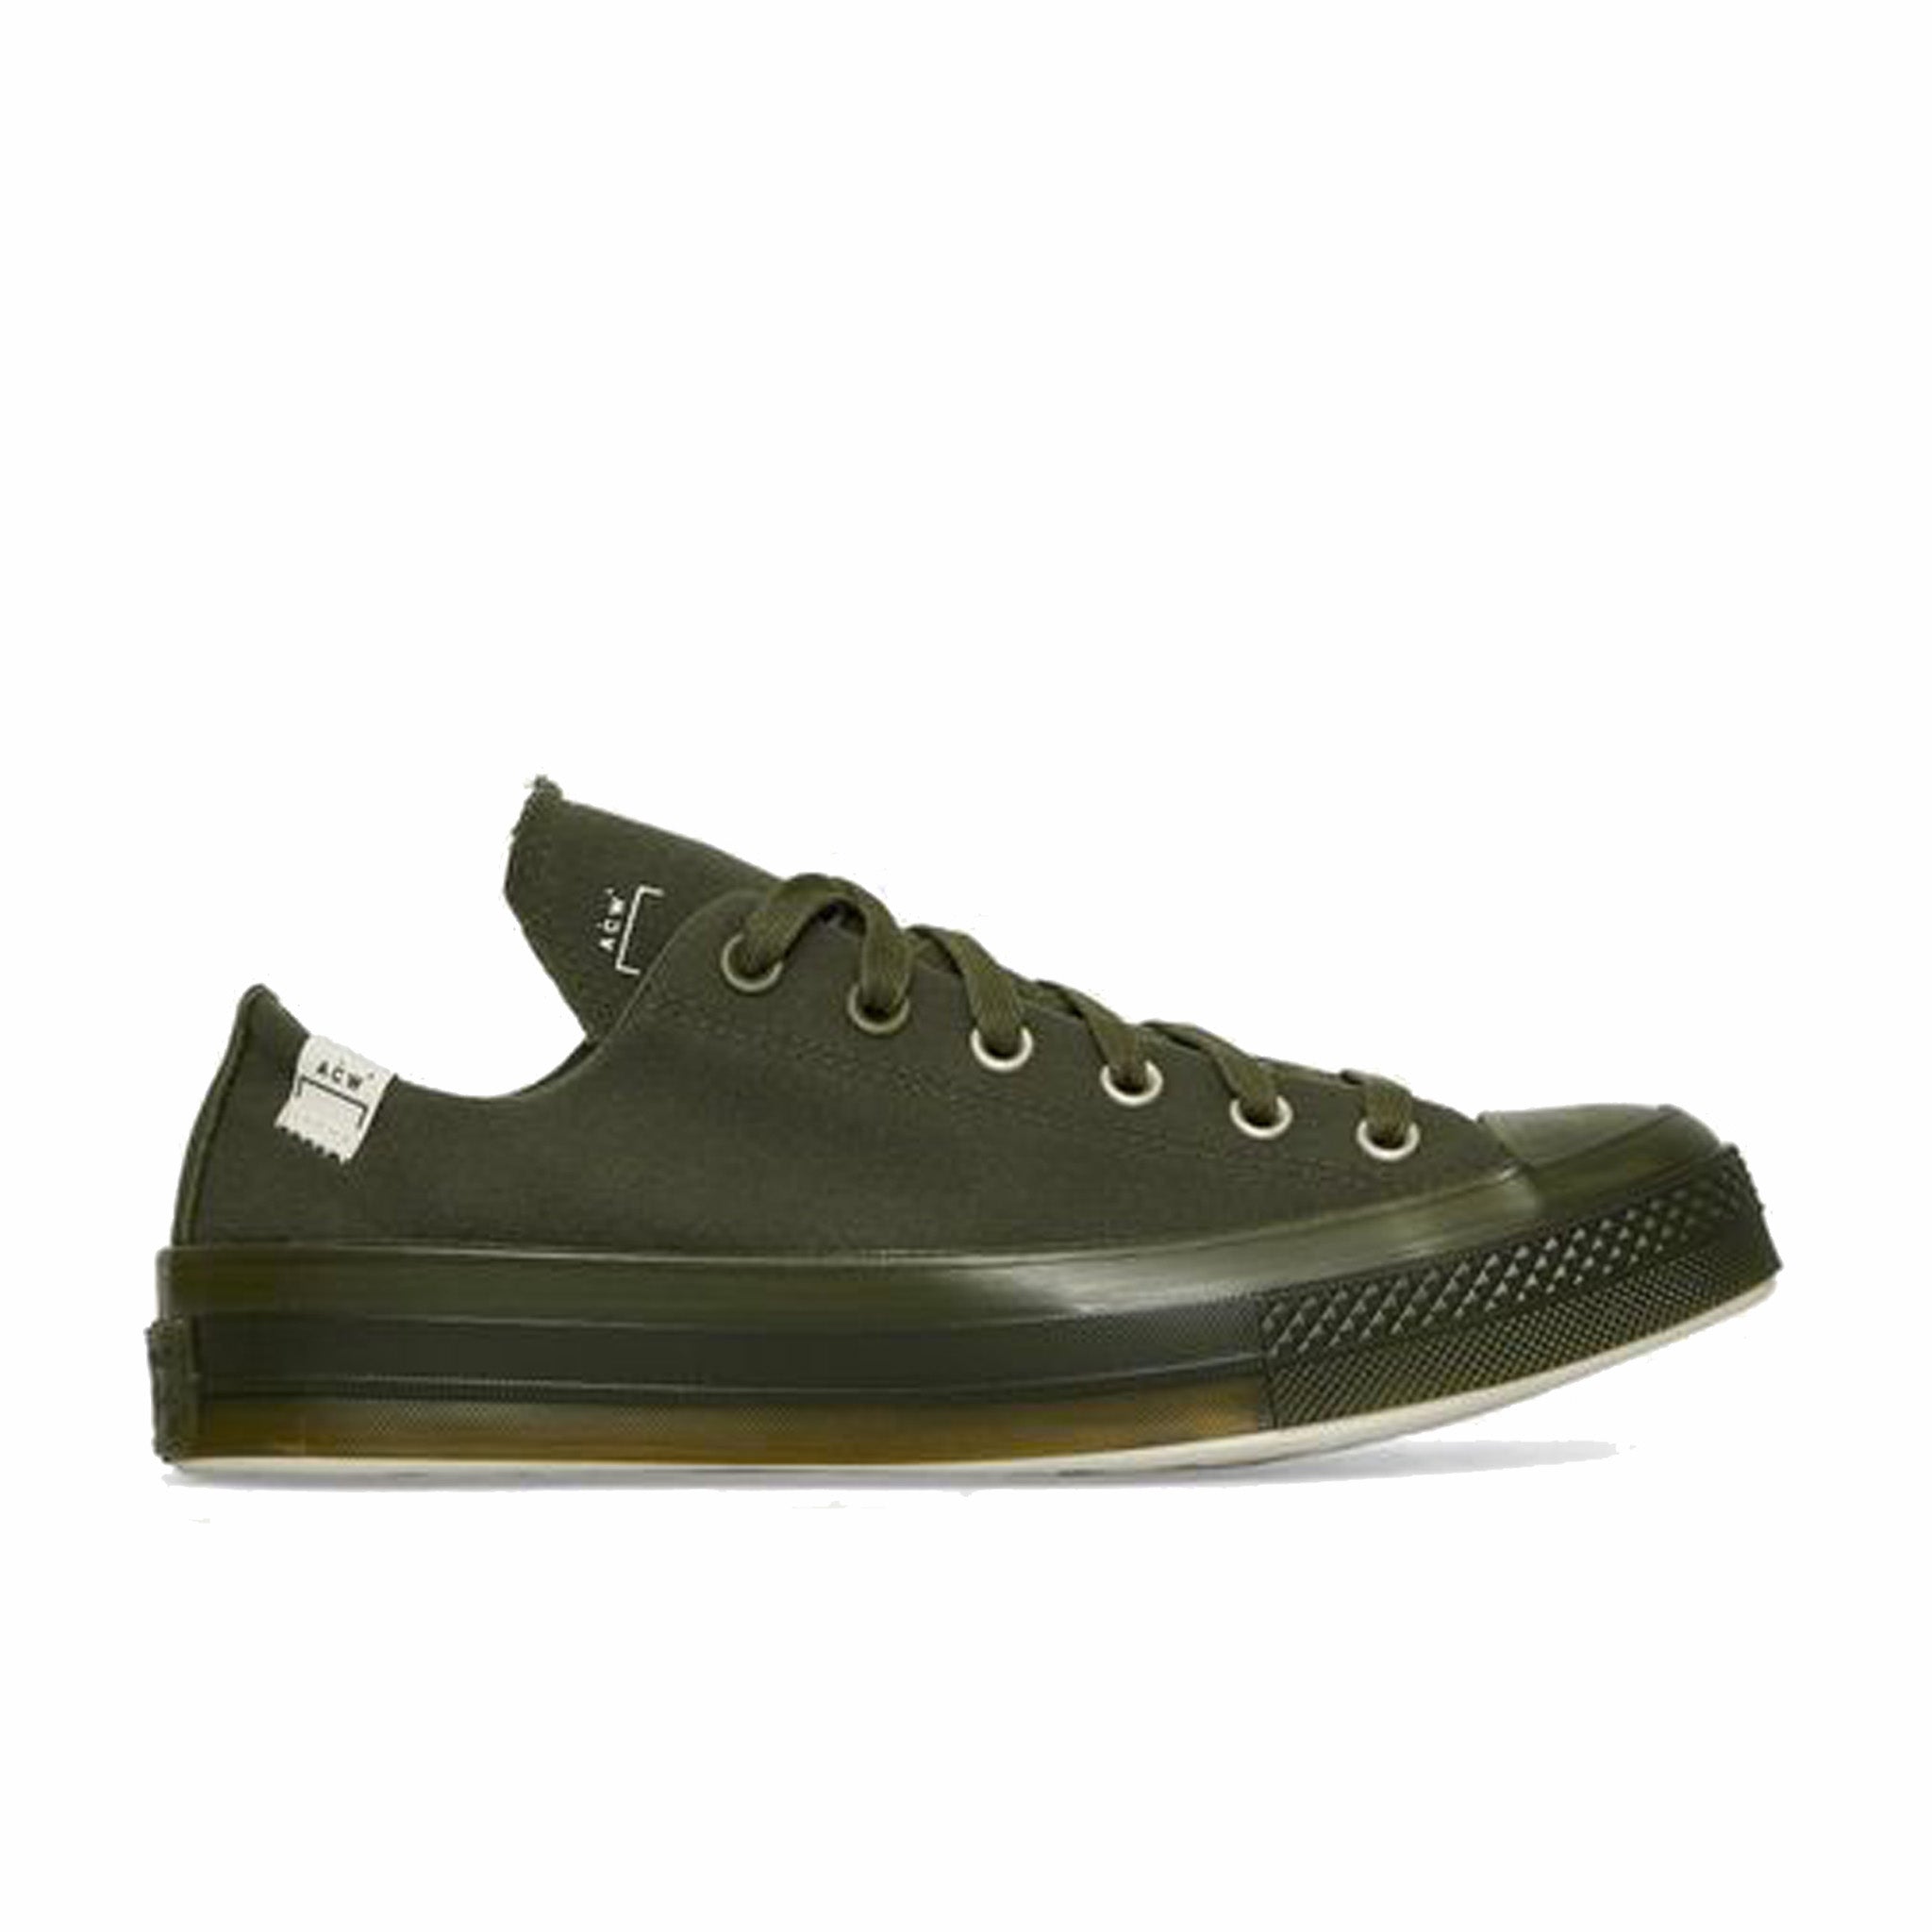 A-COLD-WALL* x Converse Chuck 70 Low Sneakers (Pine Green/Silver Birch) - August Shop